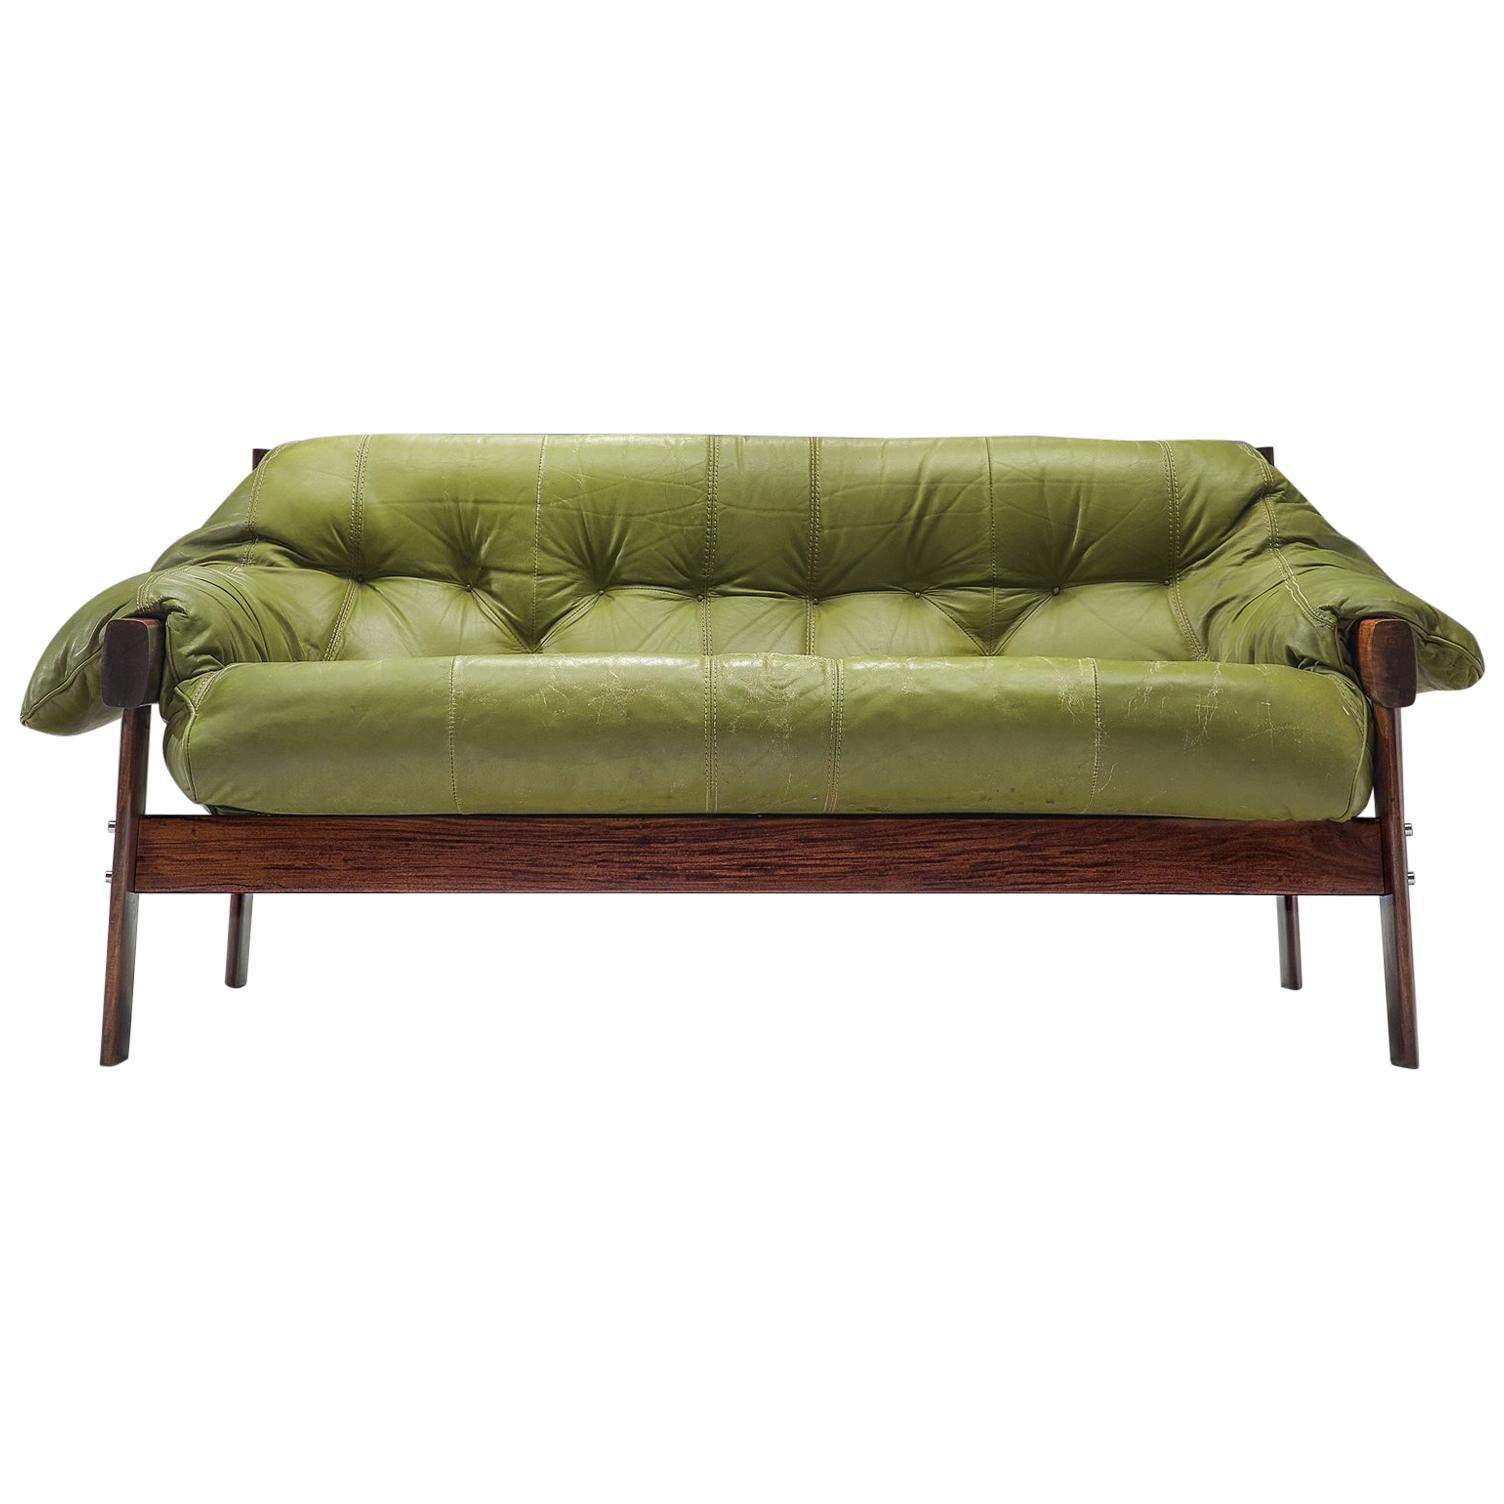 Percival Lafer Brazilian Sofa with Green Leather